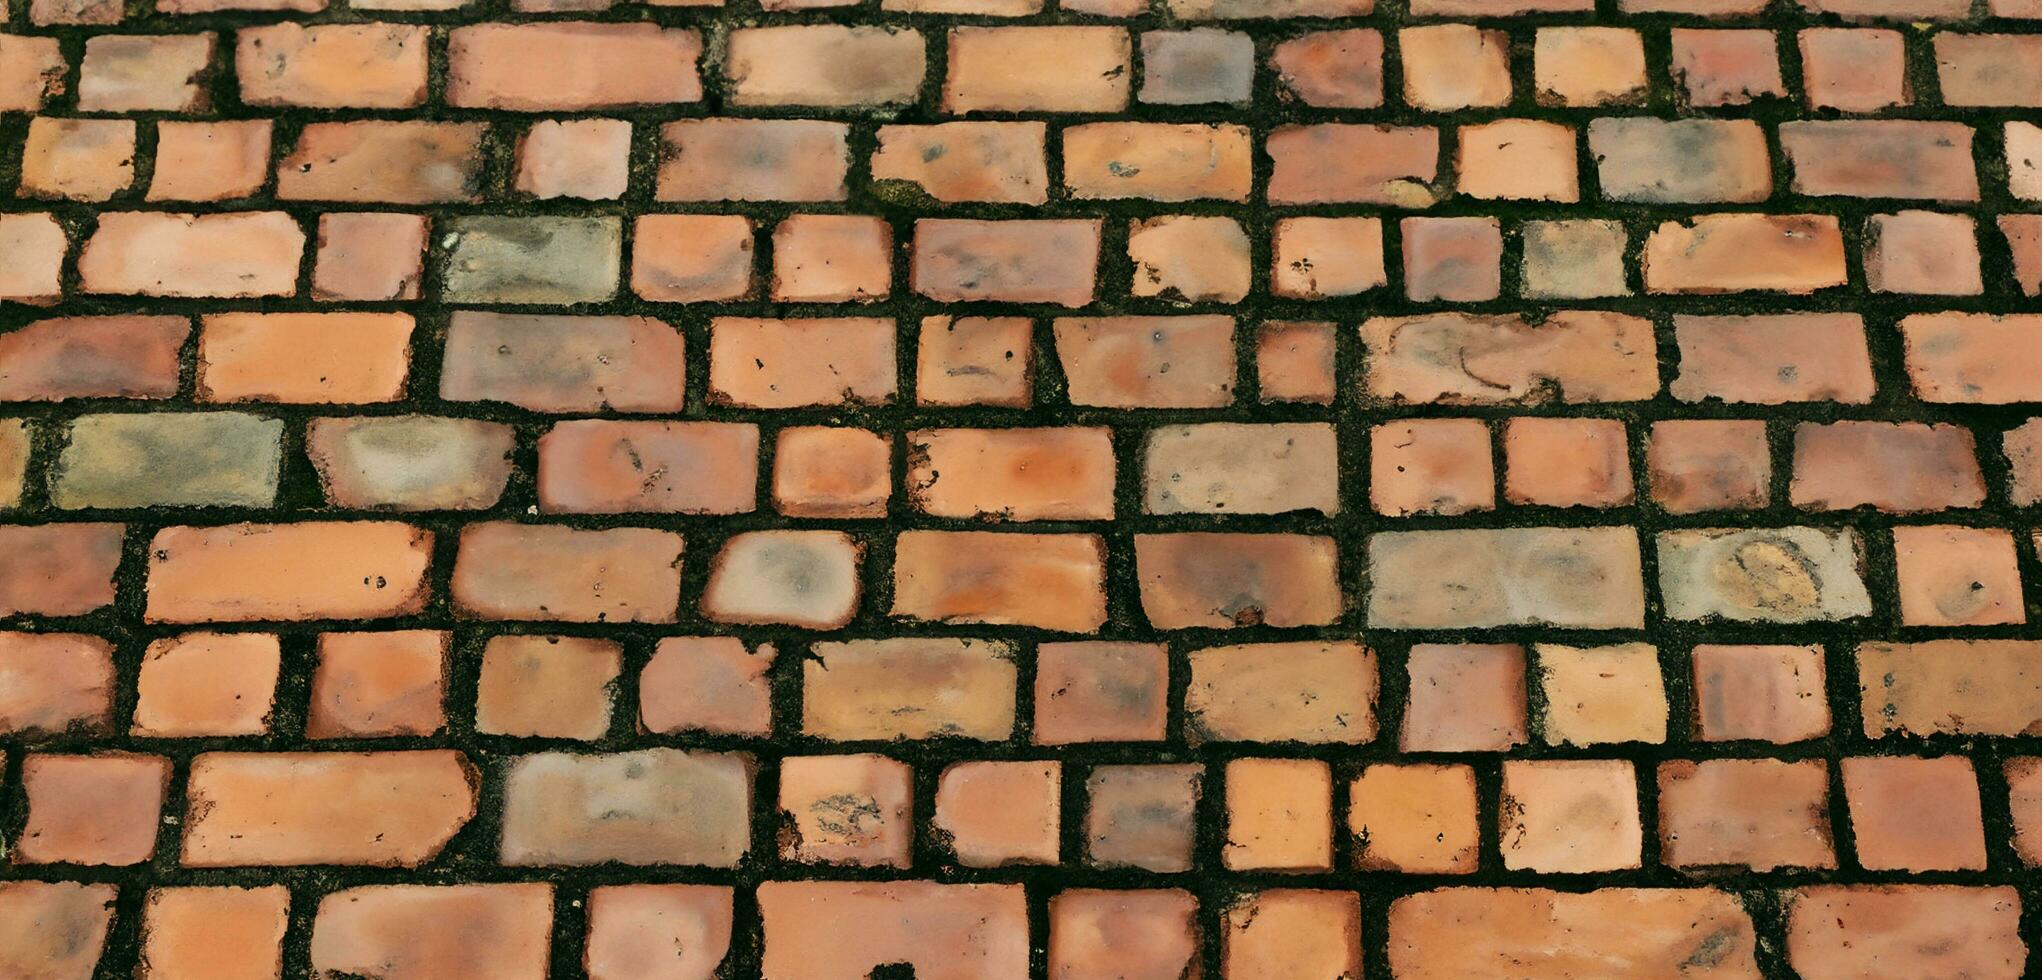 cobblestone pavement Close up of the detail cobblestones in an old street Road surface made of brown rectangular stones.old road granite stones 3D illustration photo